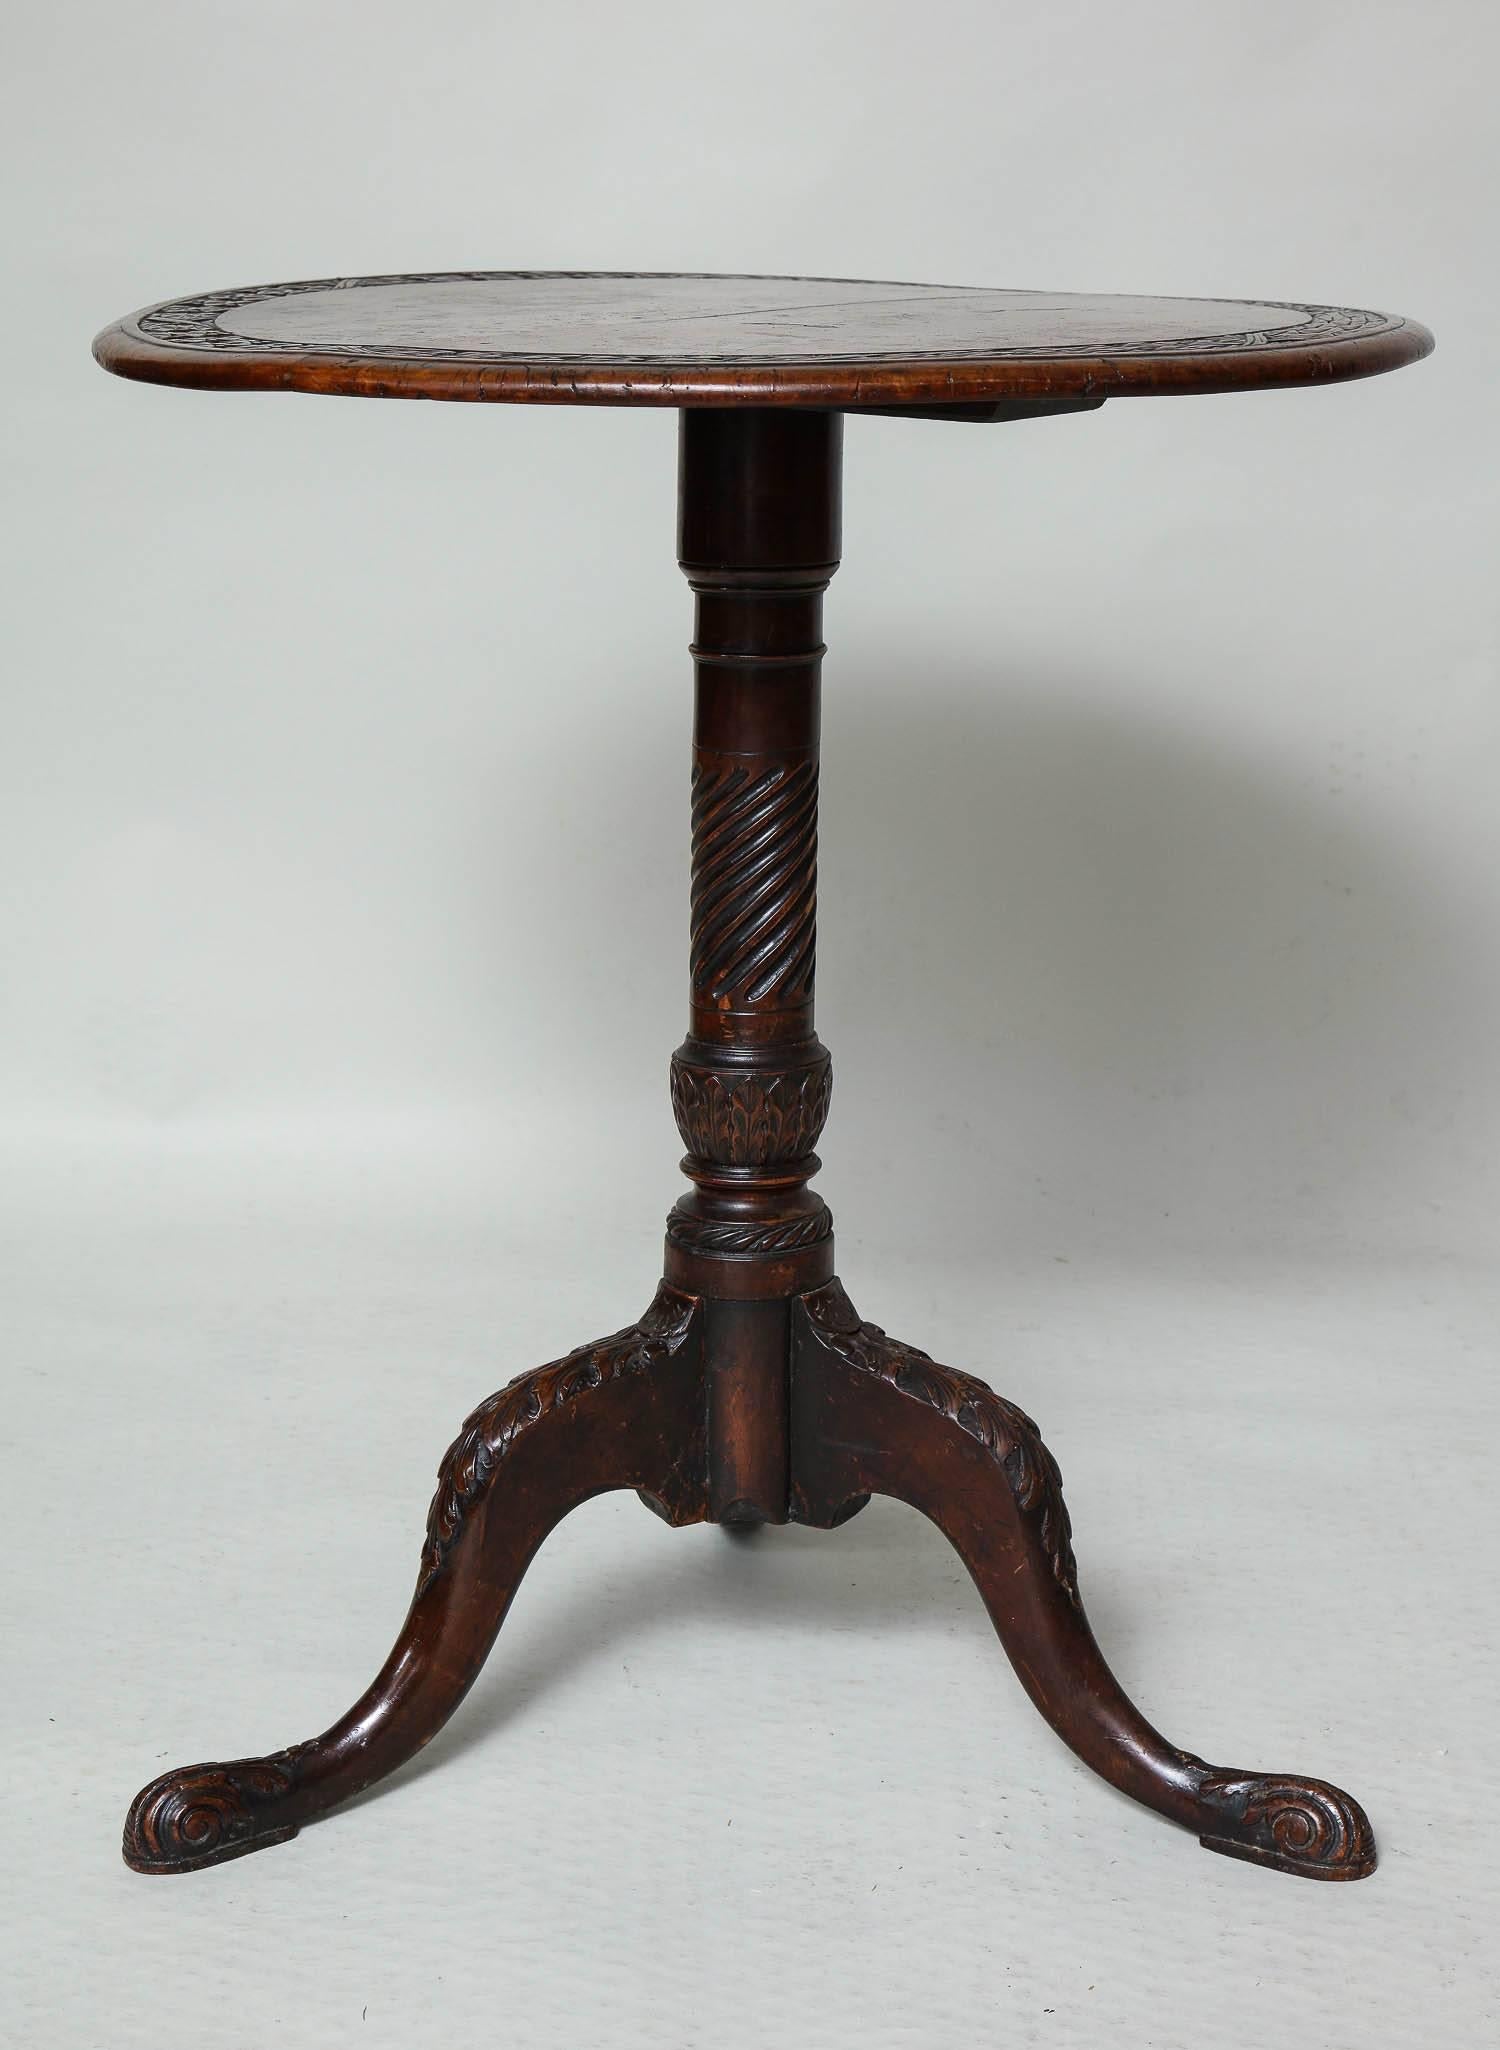 Most unusual Irish tripod table, the top constructed of two planks of solid burl timber and having a carved wreath band over spiral fluted and acanthus leaf carved shaft, the foliate carved legs ending in carved scroll legs, the whole possessing